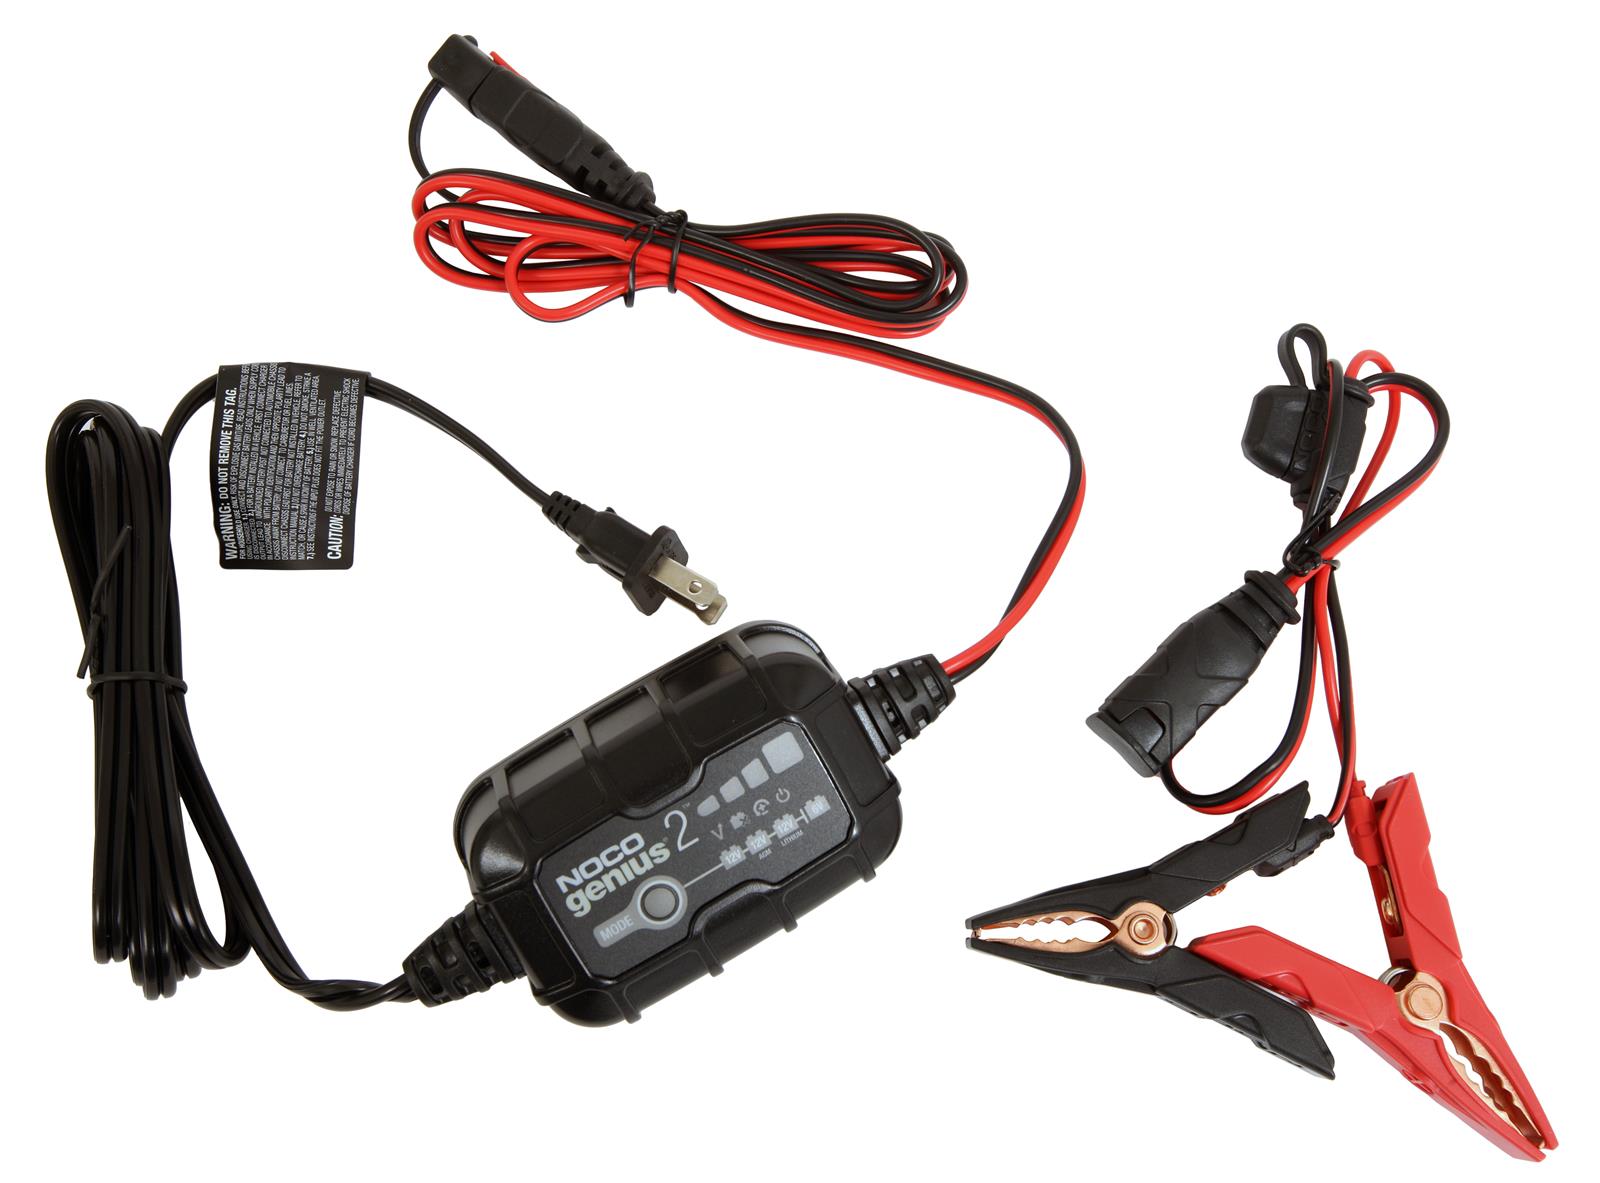 NOCO GENIUS BATTERY CHARGER 2 AMP — Cuzn Bob's Motorcycles